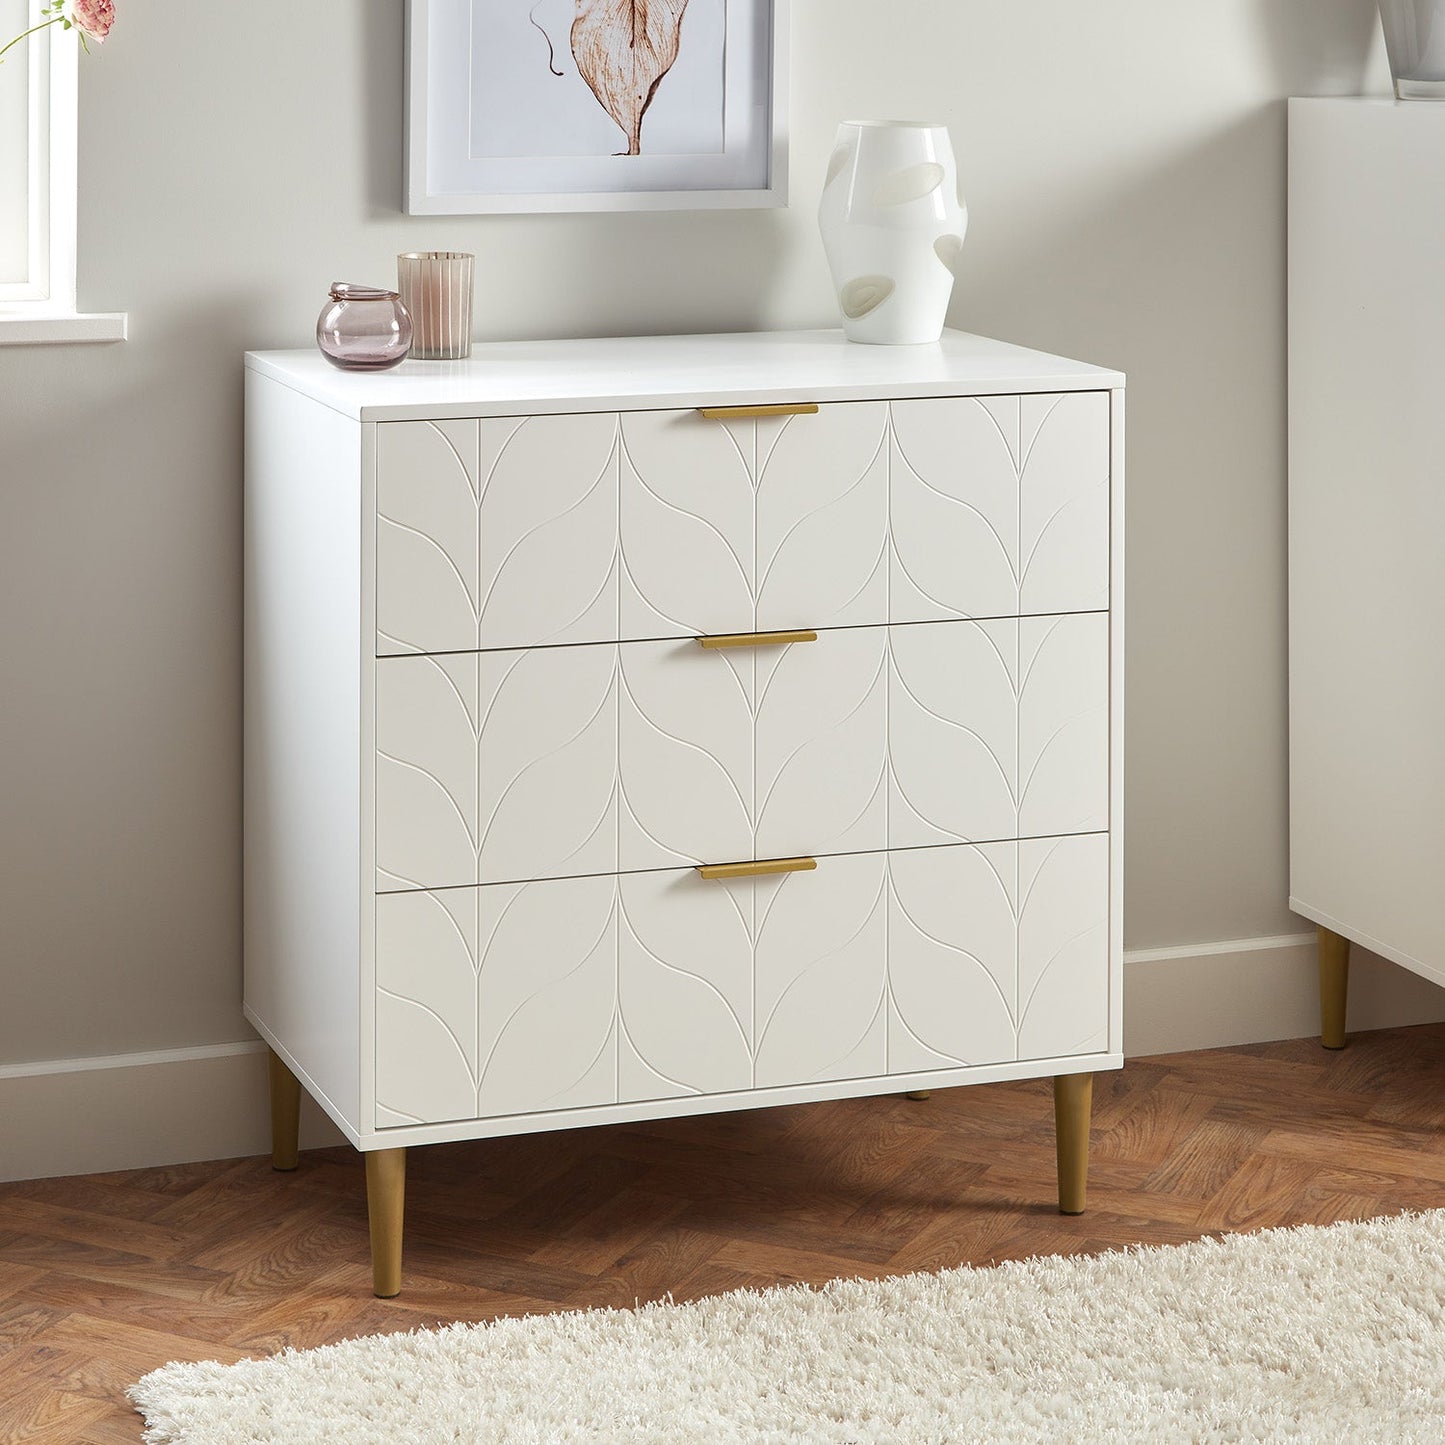 Gloria 4 piece bedroom furniture set - 3 drawer chest of drawers - white - Laura James